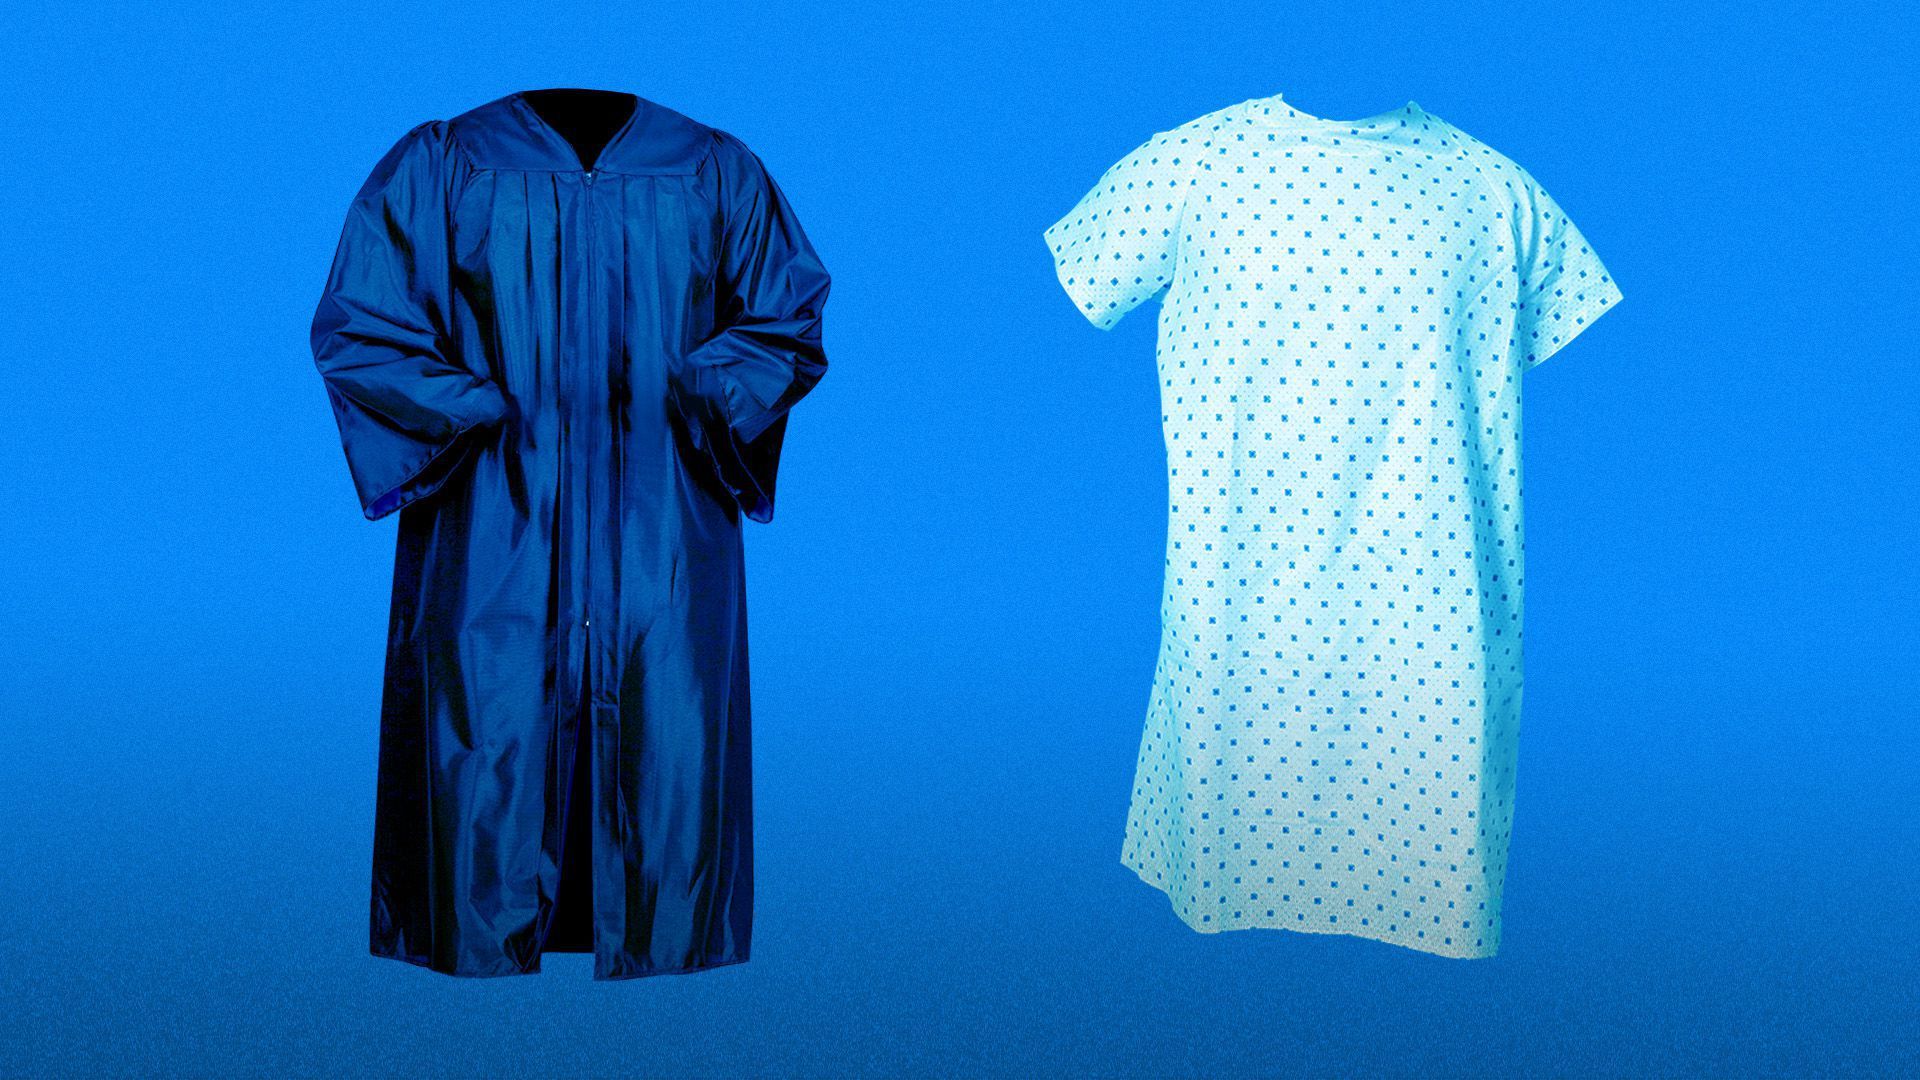 An empty judge's gown is next to an empty patient's gown